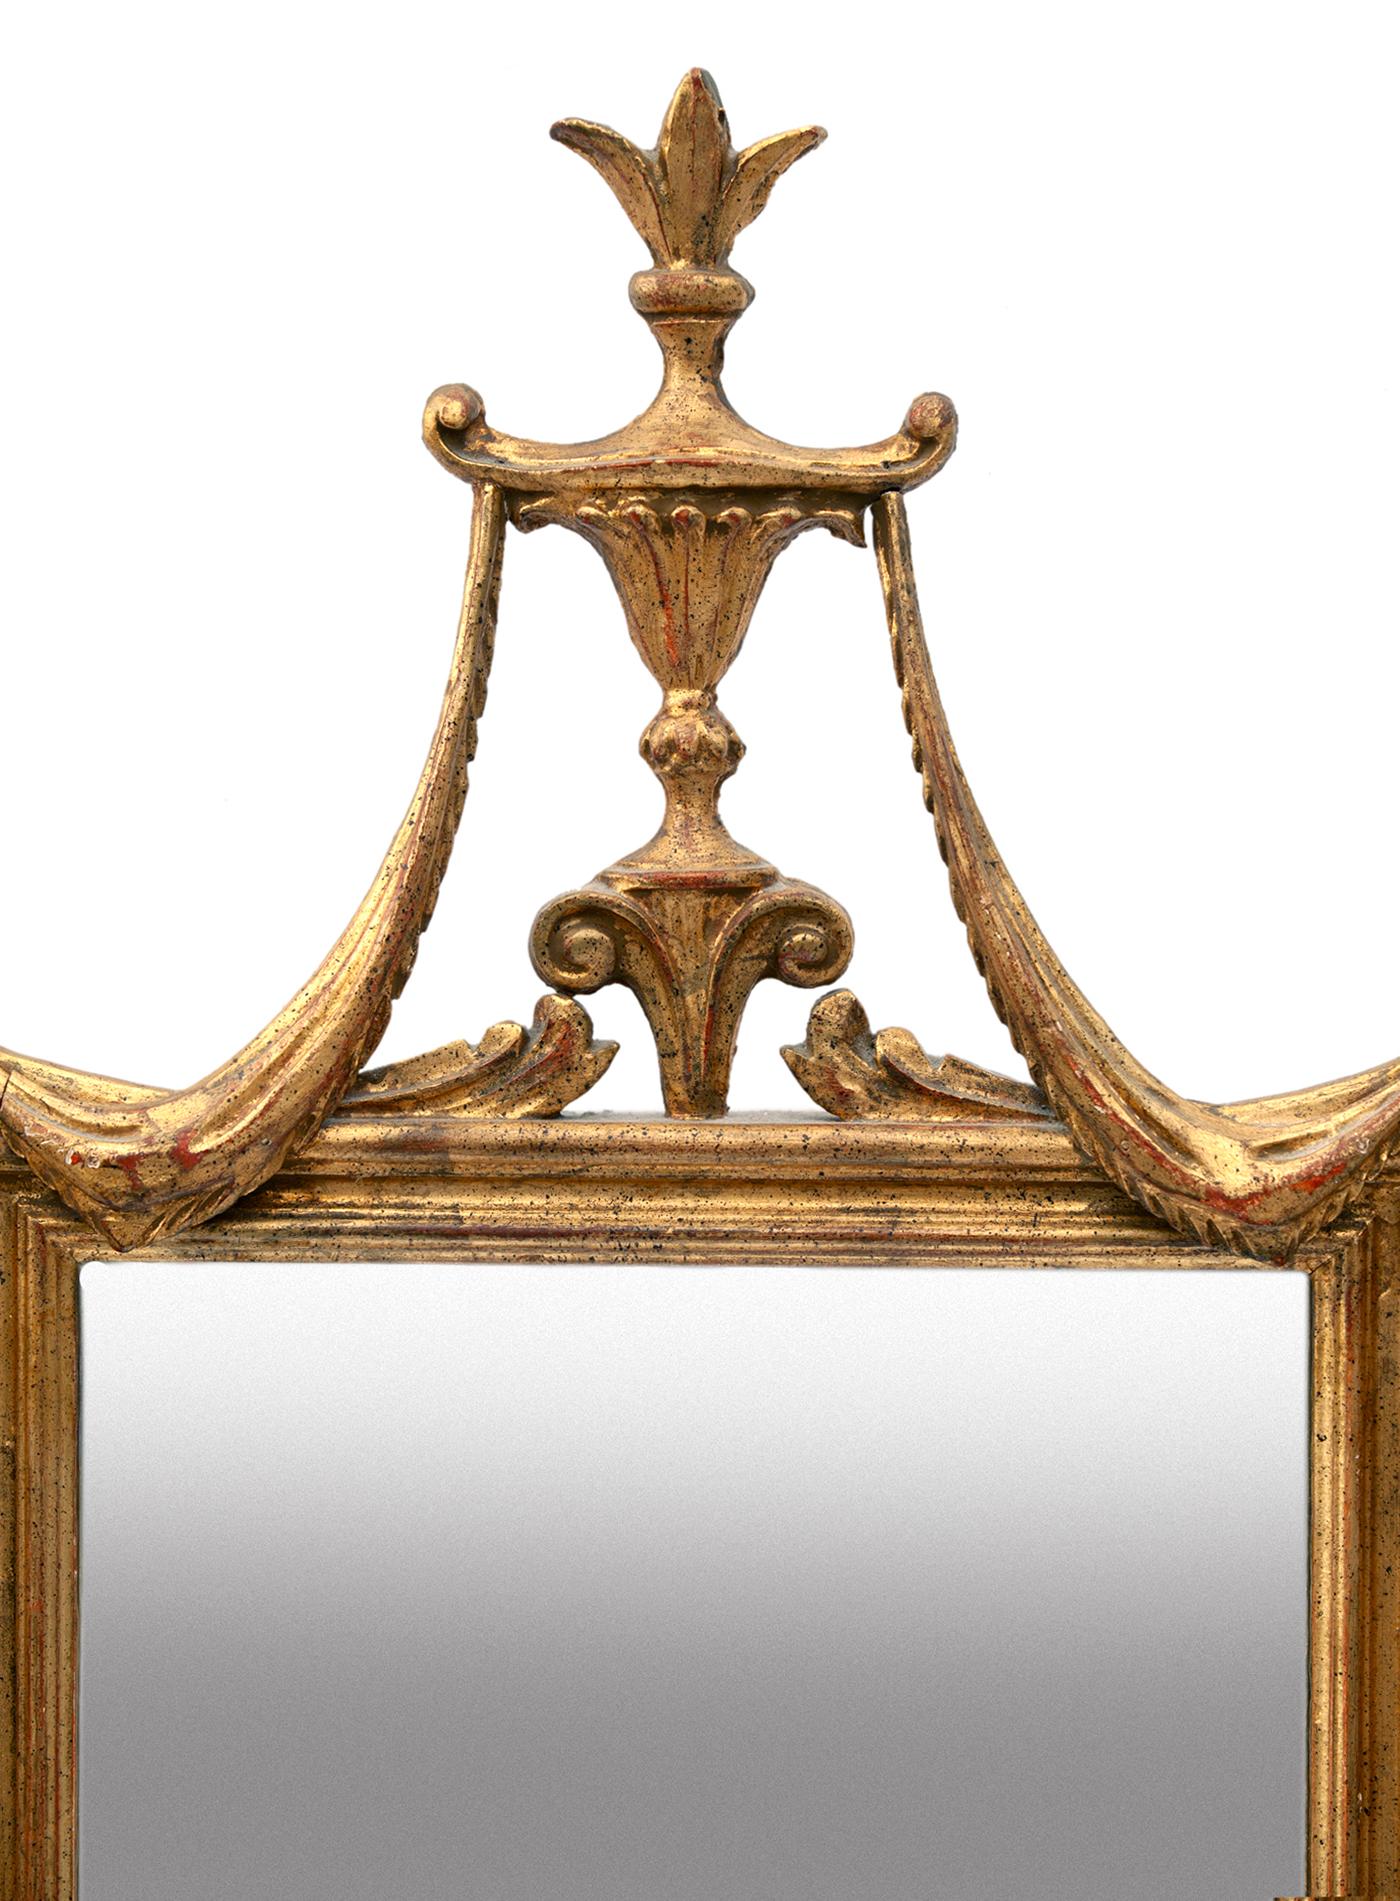 A rectangular frame of giltwood topped with an urn which carries dramatic draped swags on both sides.
The original mirror is set in a magnificent gilt resin frame.
A grand statement piece which will focus and enhance any interior.
With wire on the